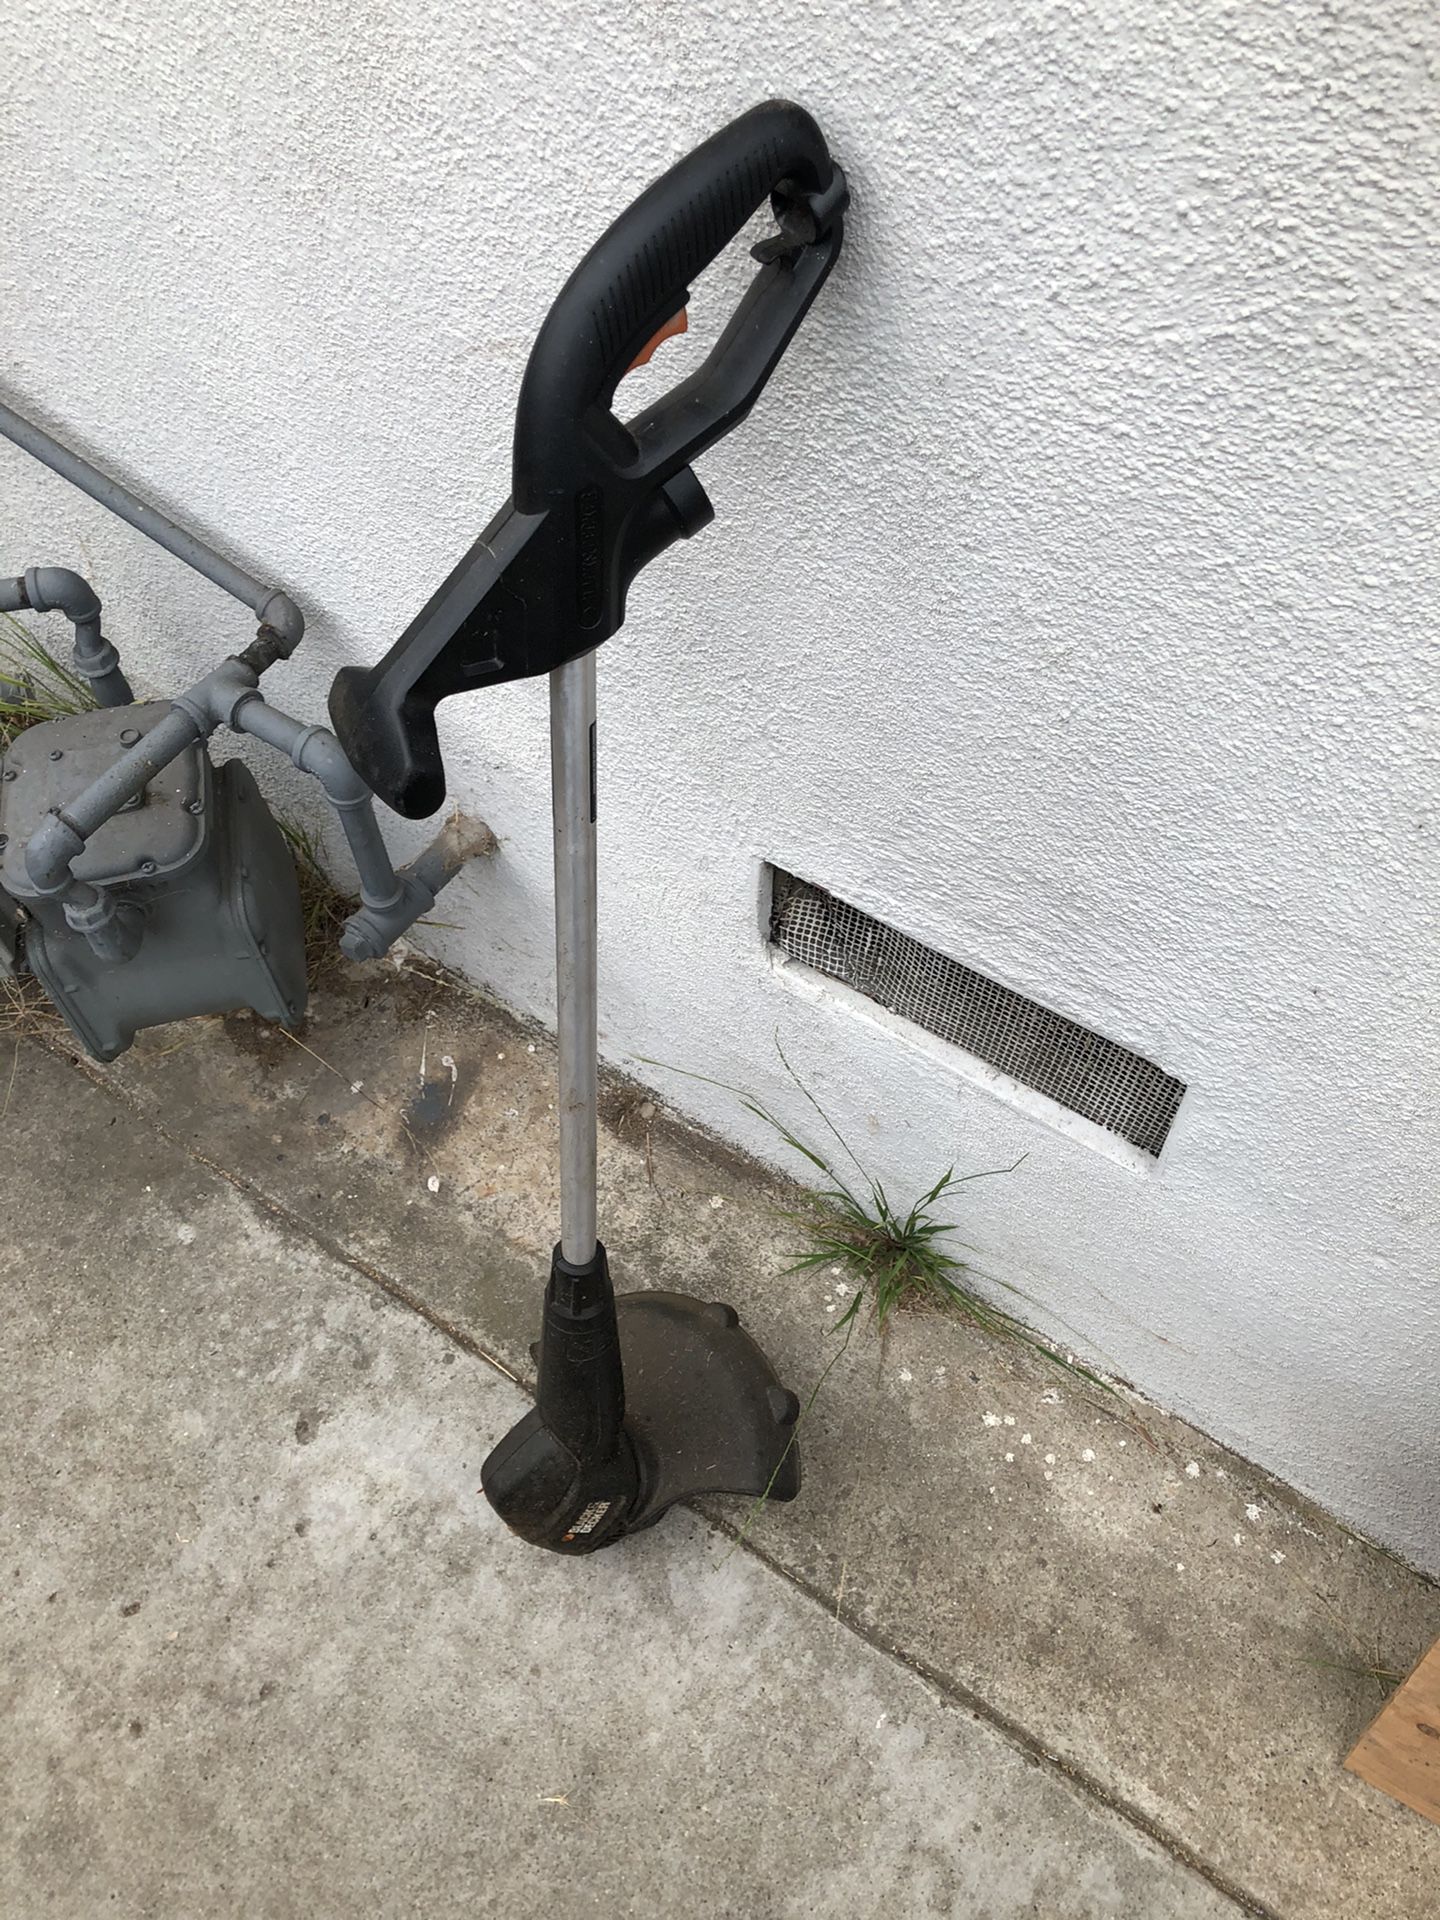 Black and Decker weed whacker